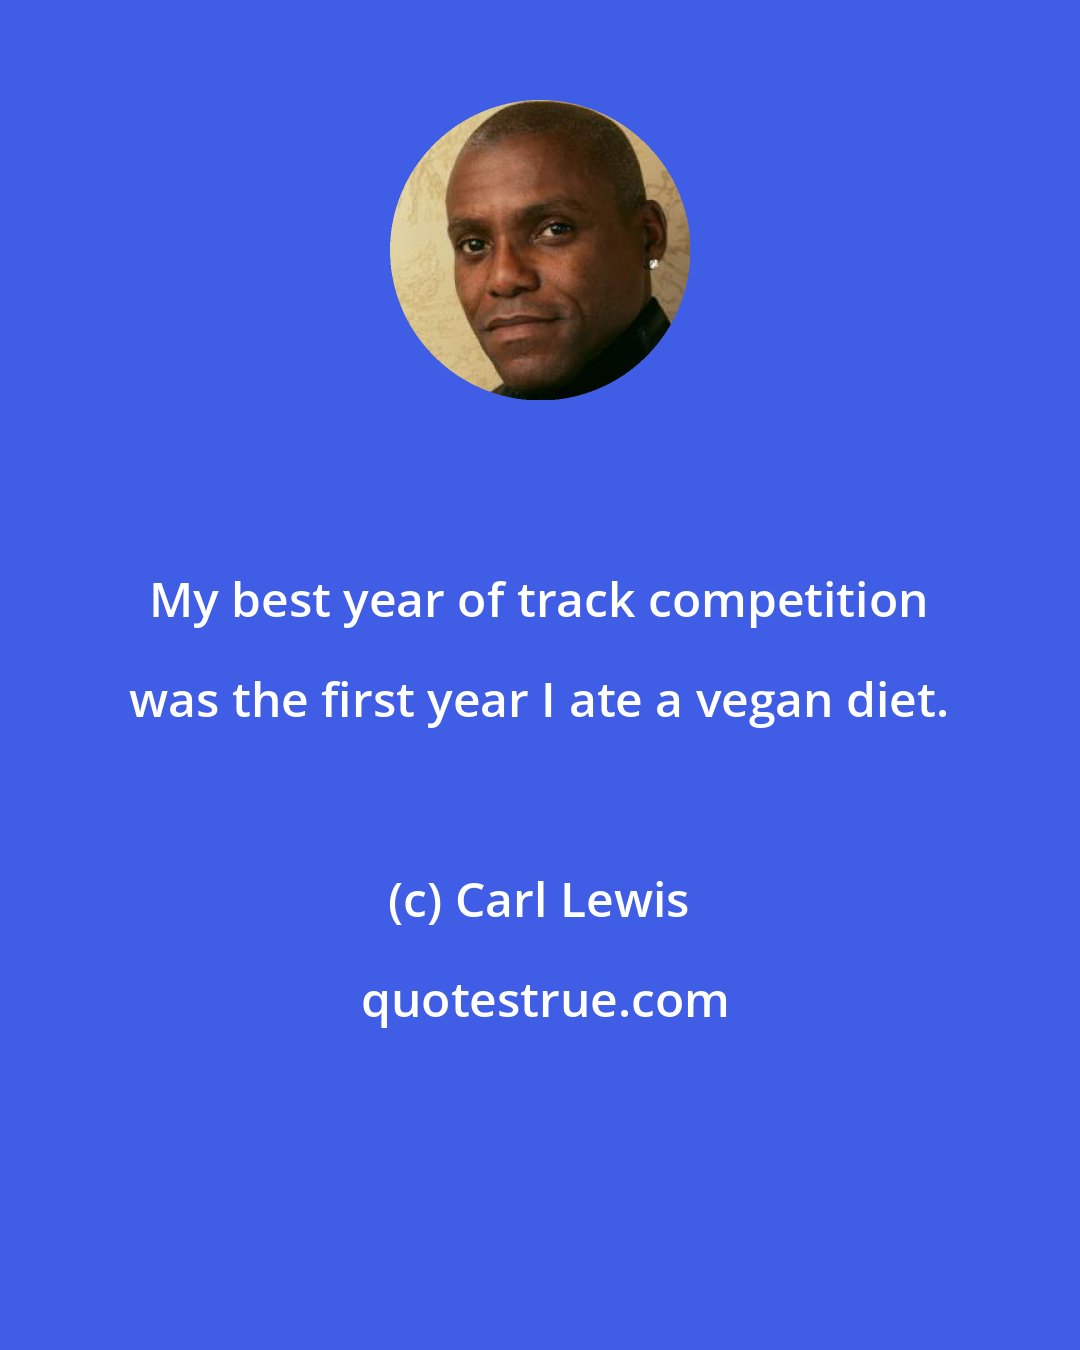 Carl Lewis: My best year of track competition was the first year I ate a vegan diet.